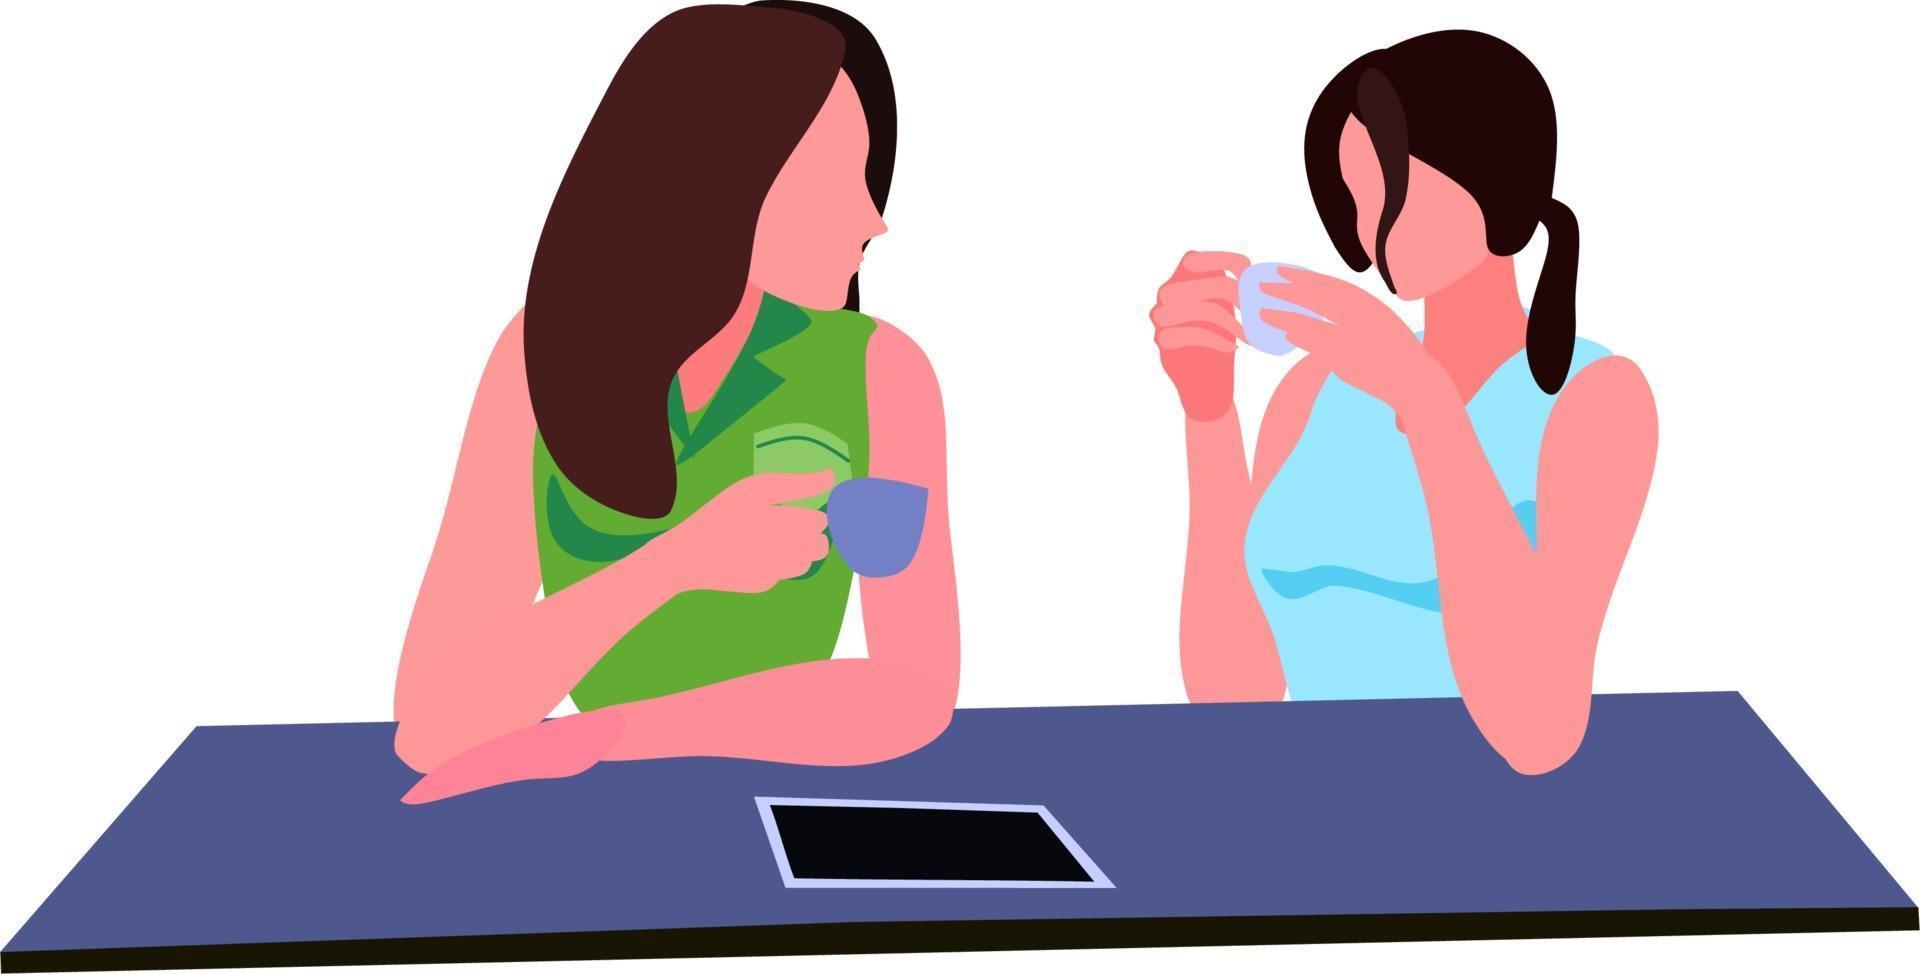 Two women drinking coffee together vector